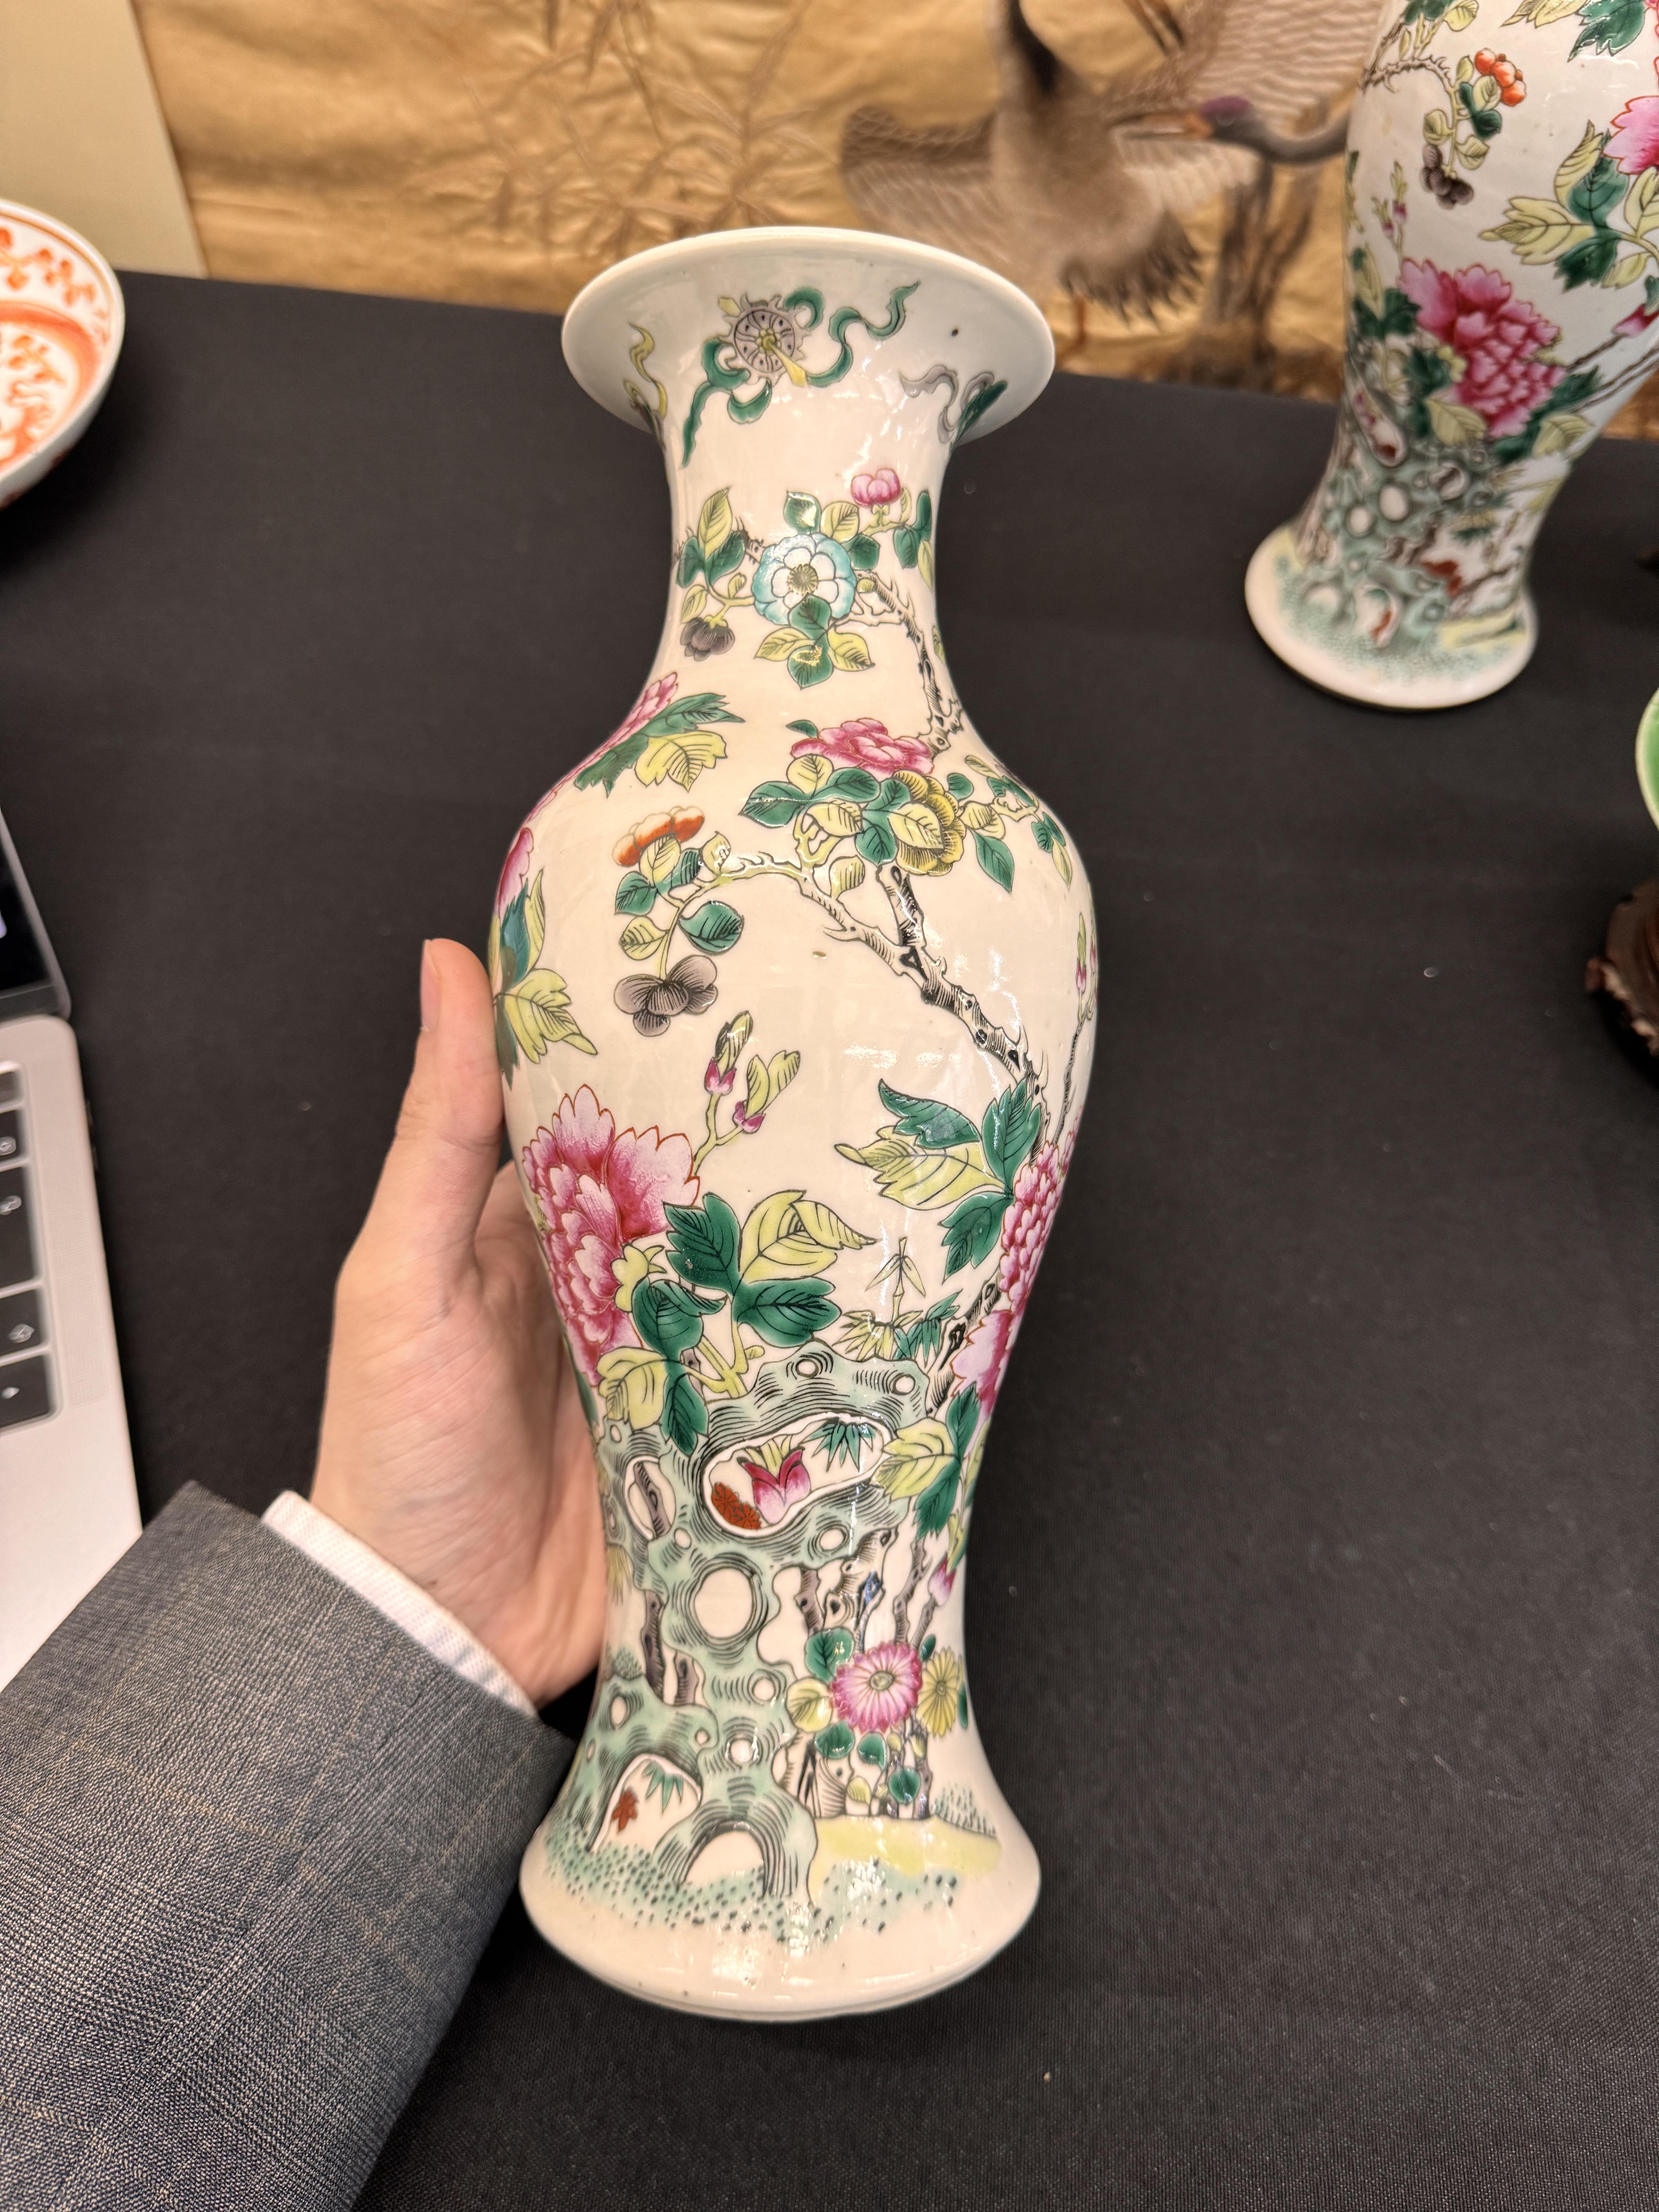 A PAIR OF CHINESE FAMILLE-ROSE 'PEONY' VASES 清 十九或二十世紀 粉彩牡丹紋瓶一對 - Image 17 of 19